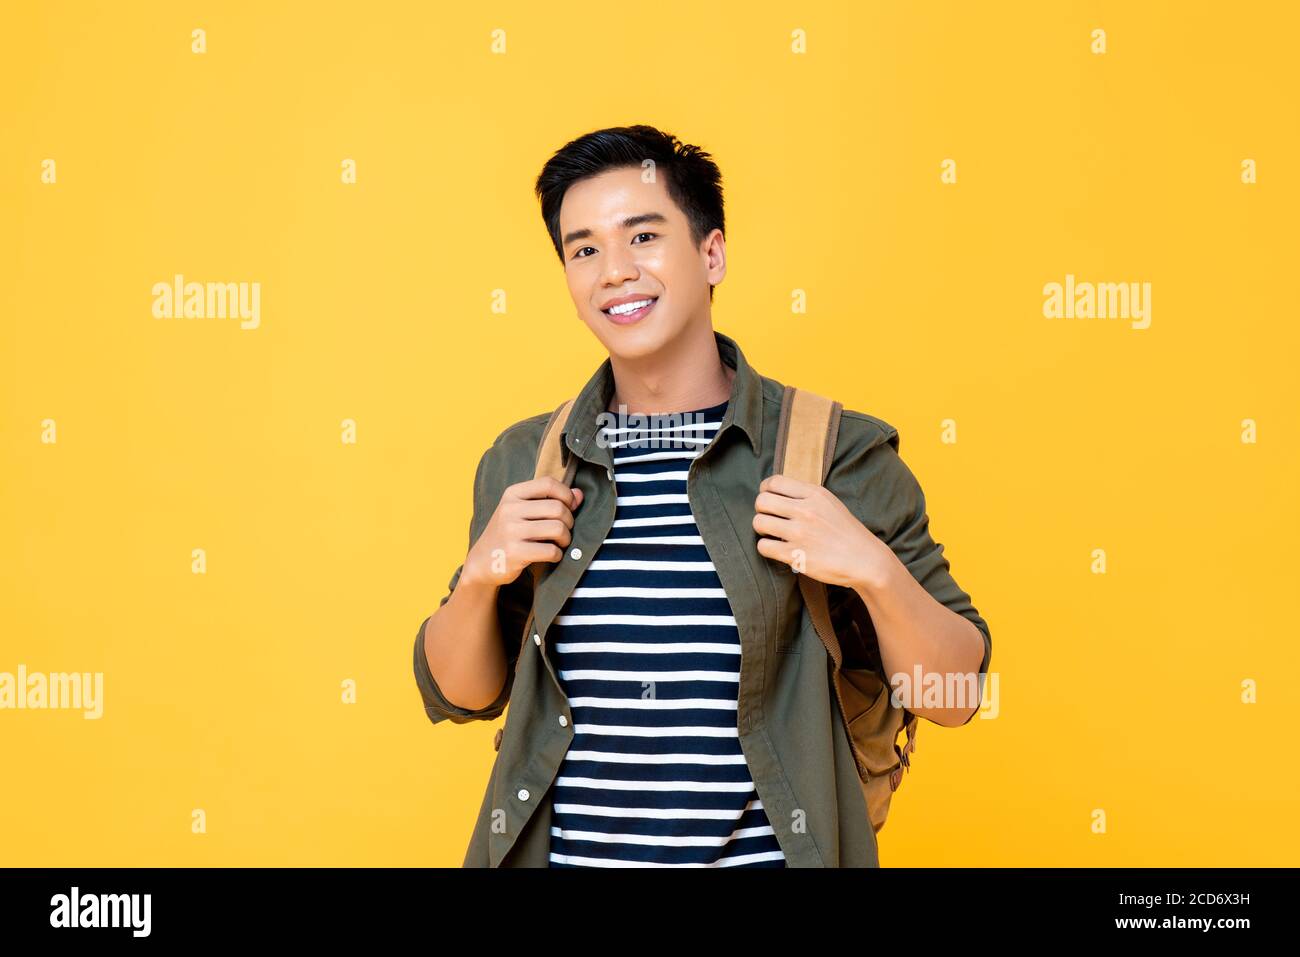 Portrait of smiling young male Asian tourist carrying backpack ready to travel in isolated studio yellow background Stock Photo